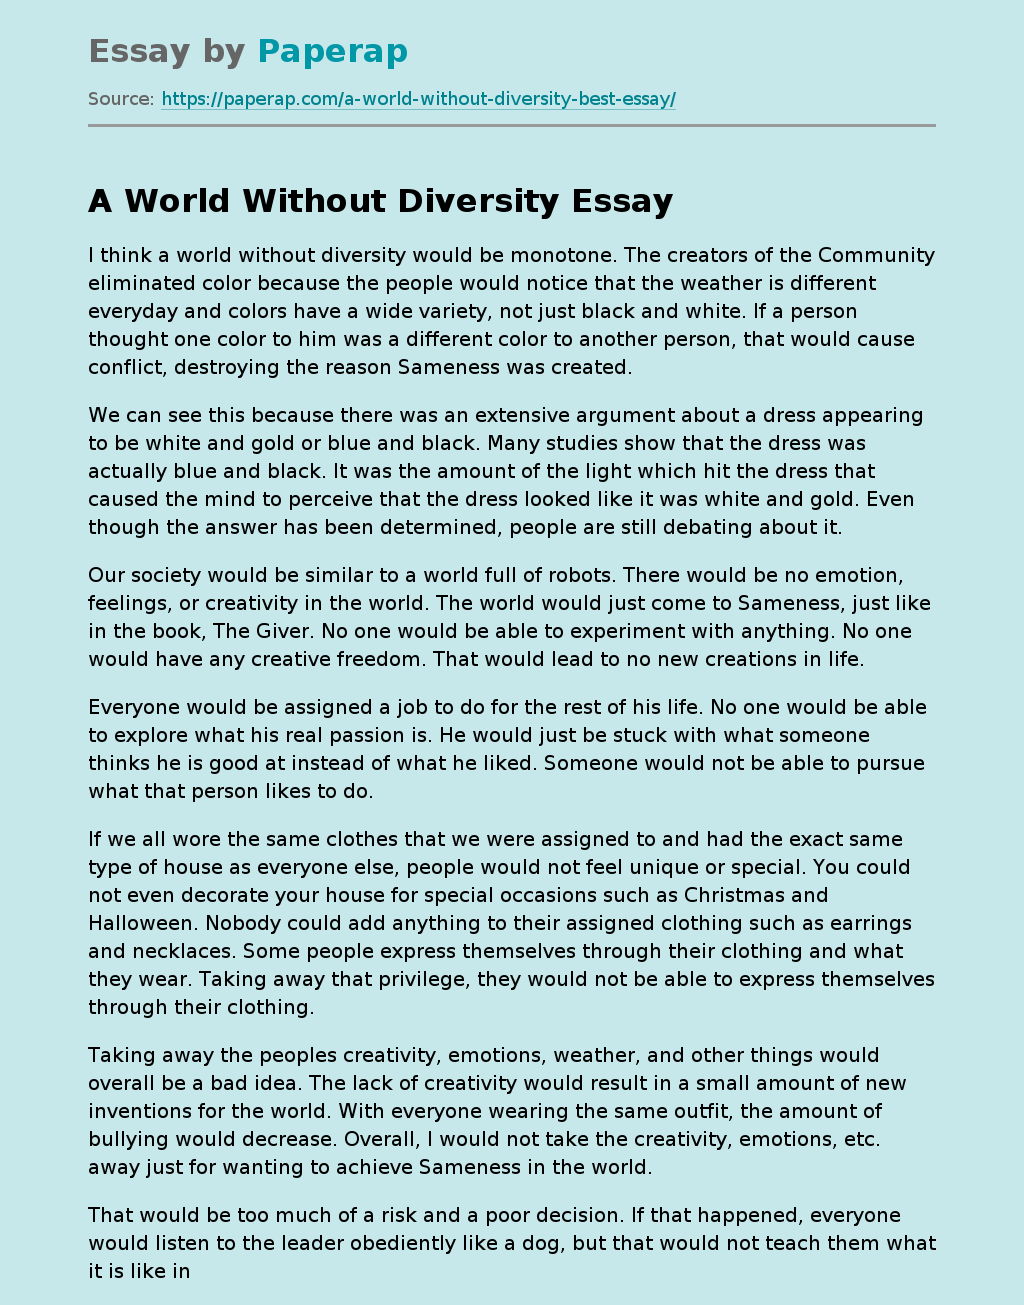 A World Without Diversity